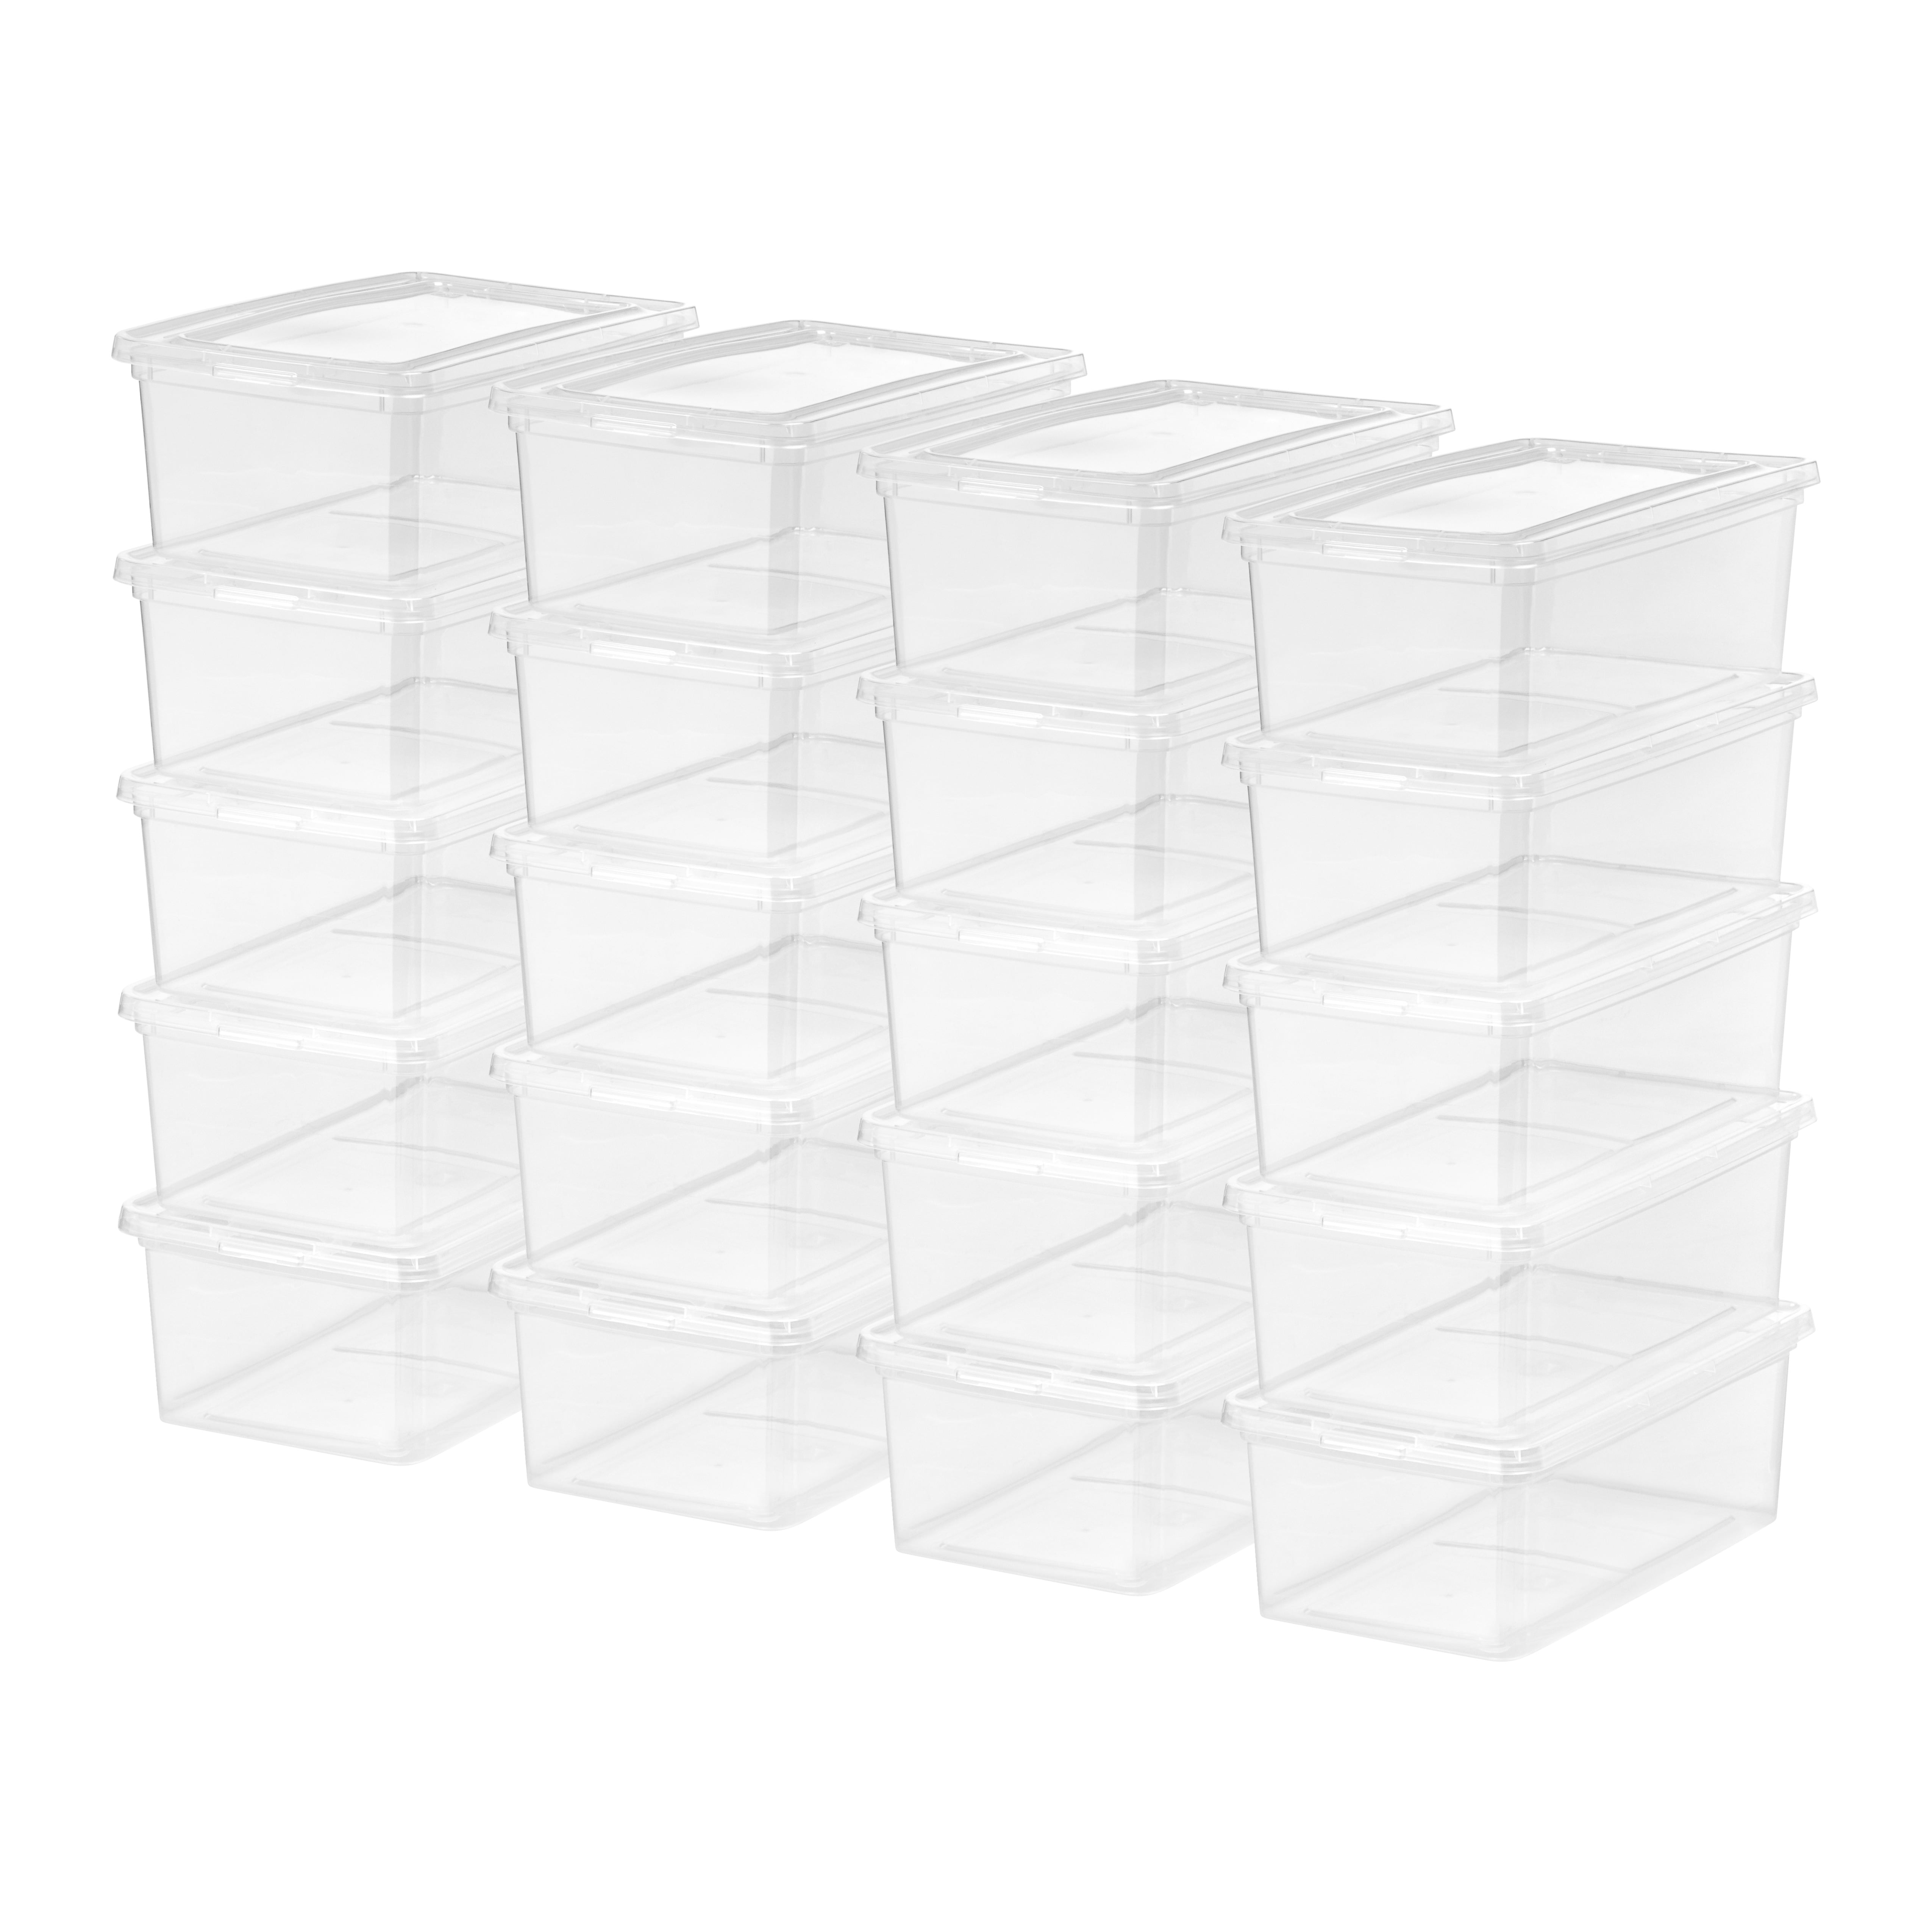 Eease 5pcs Plastic Storage Box with Lid Clear Tabletop Sundry Toy Organizer Container, Size: 20x15x11CM